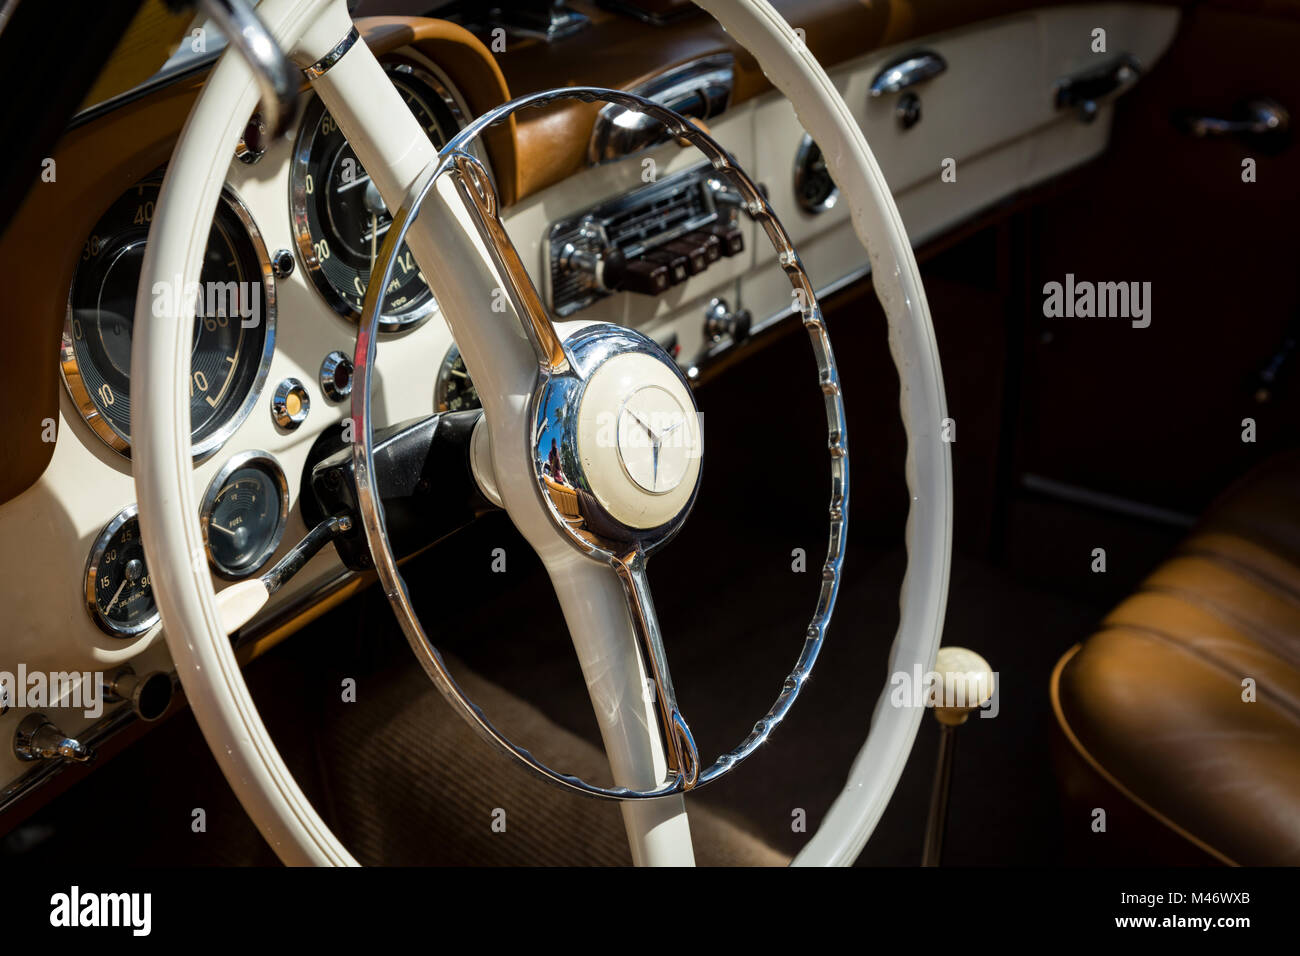 Steering wheel and dash of 1959 Mercedes Benz 190SL Convertible on display at 'Cars on 5th' autoshow, Naples, Florida, USA Stock Photo